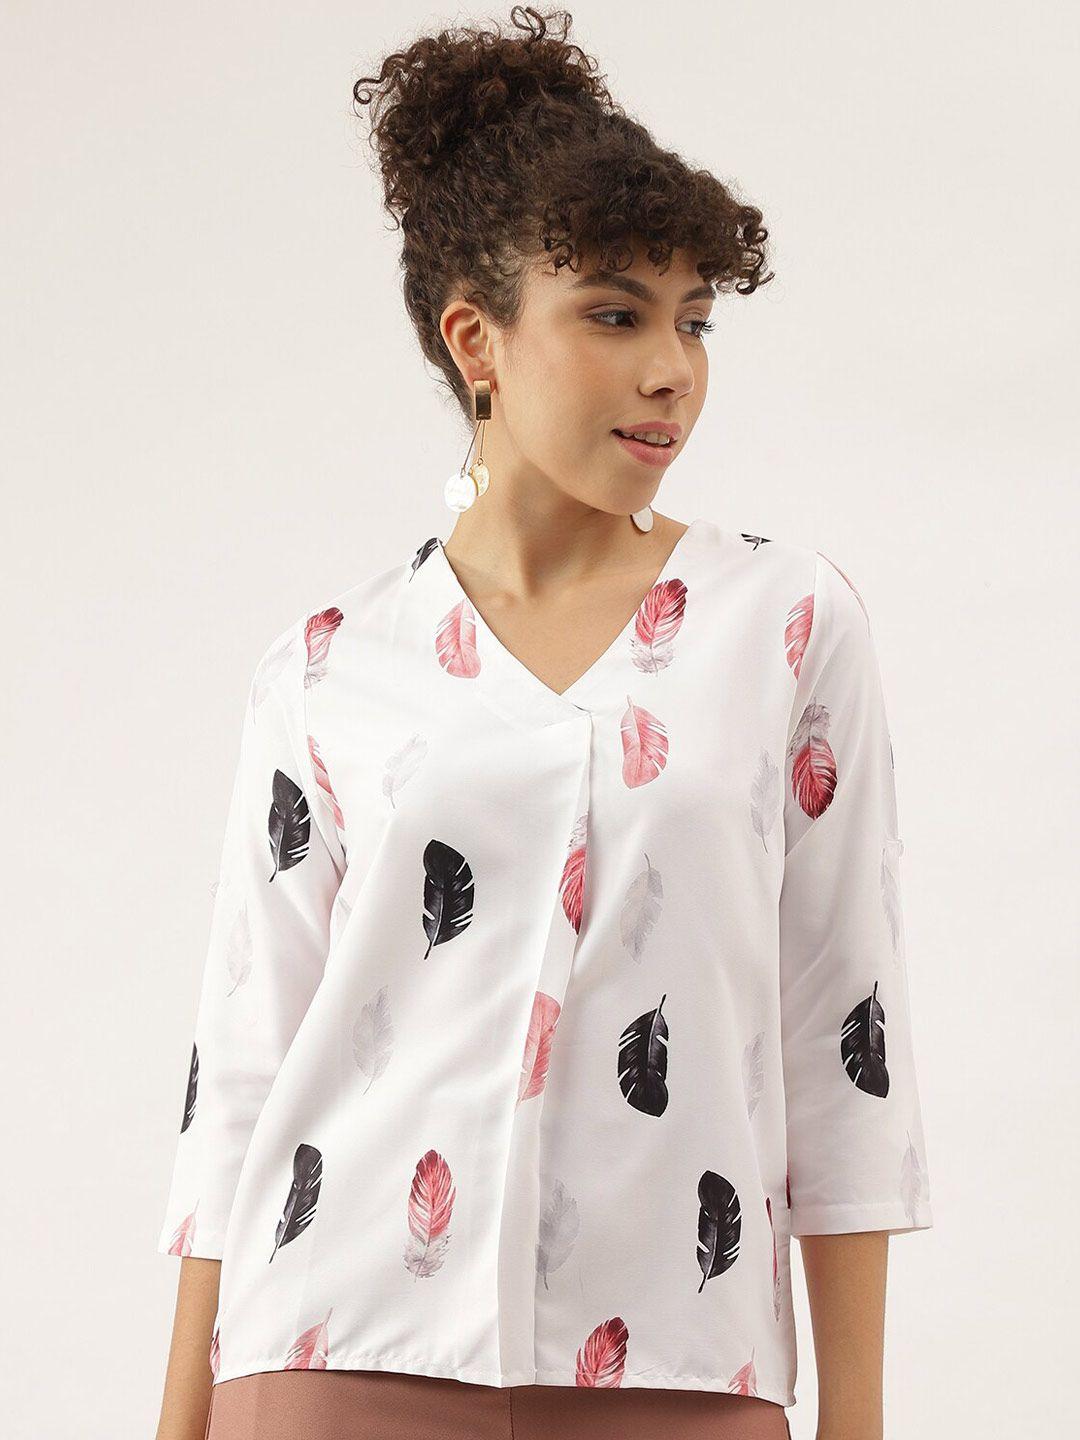 aahwan white print shirt style top